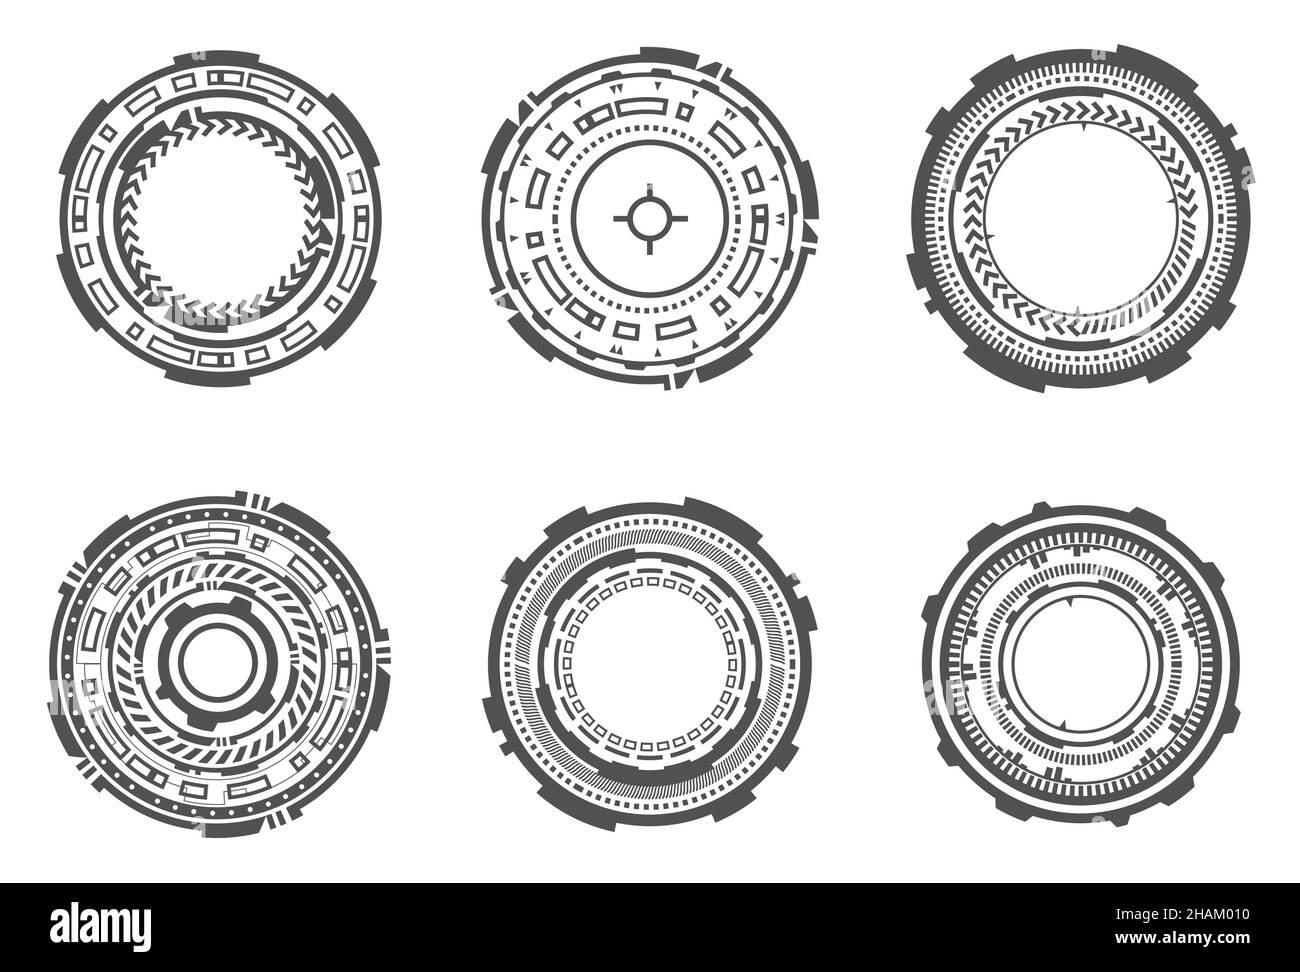 HUD futuristic elements. Abstract optical aim. Circle geometric shapes for virtual interface and games. Camera viewfinder for sniper weapon. Vector se Stock Vector